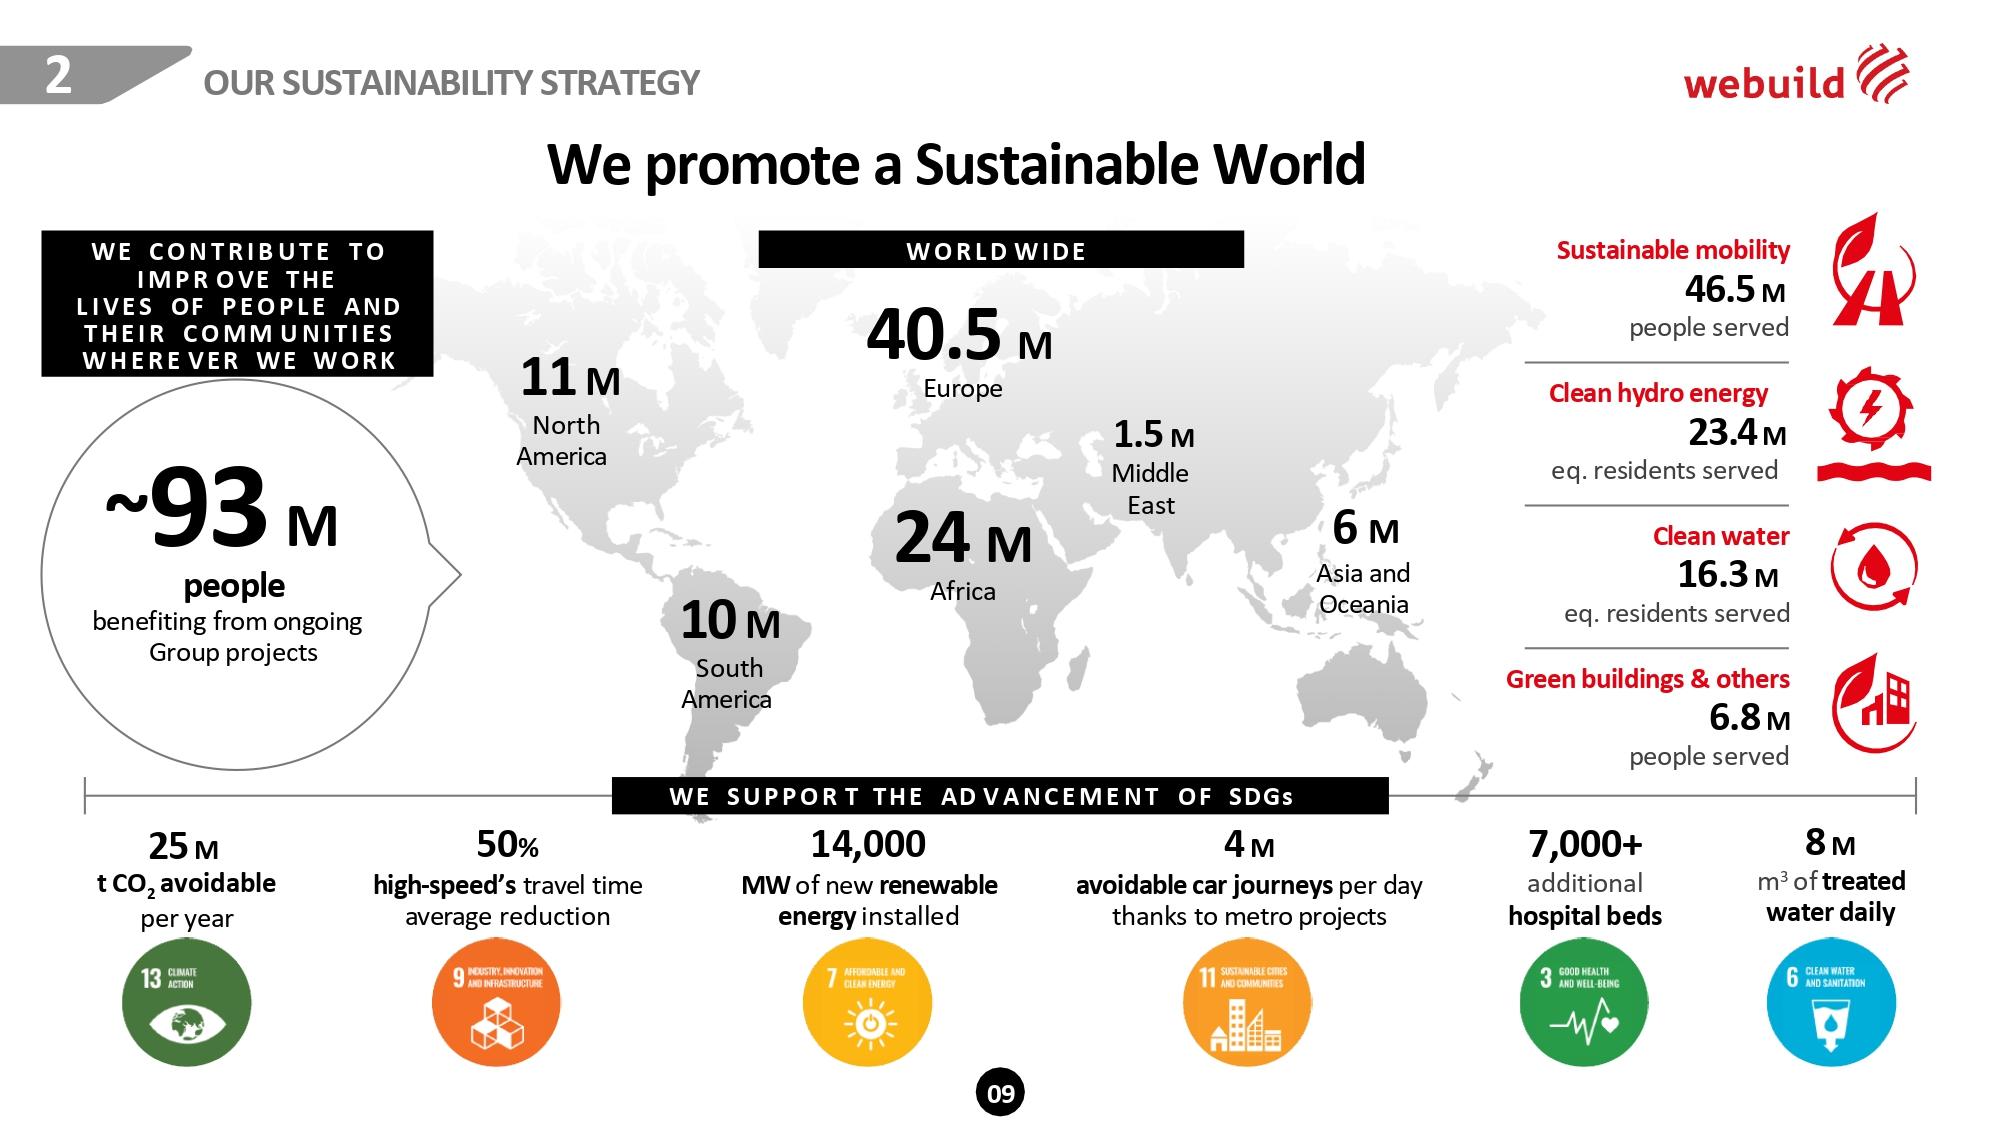 Webuild support to SDGs - We promote a Sustainable World